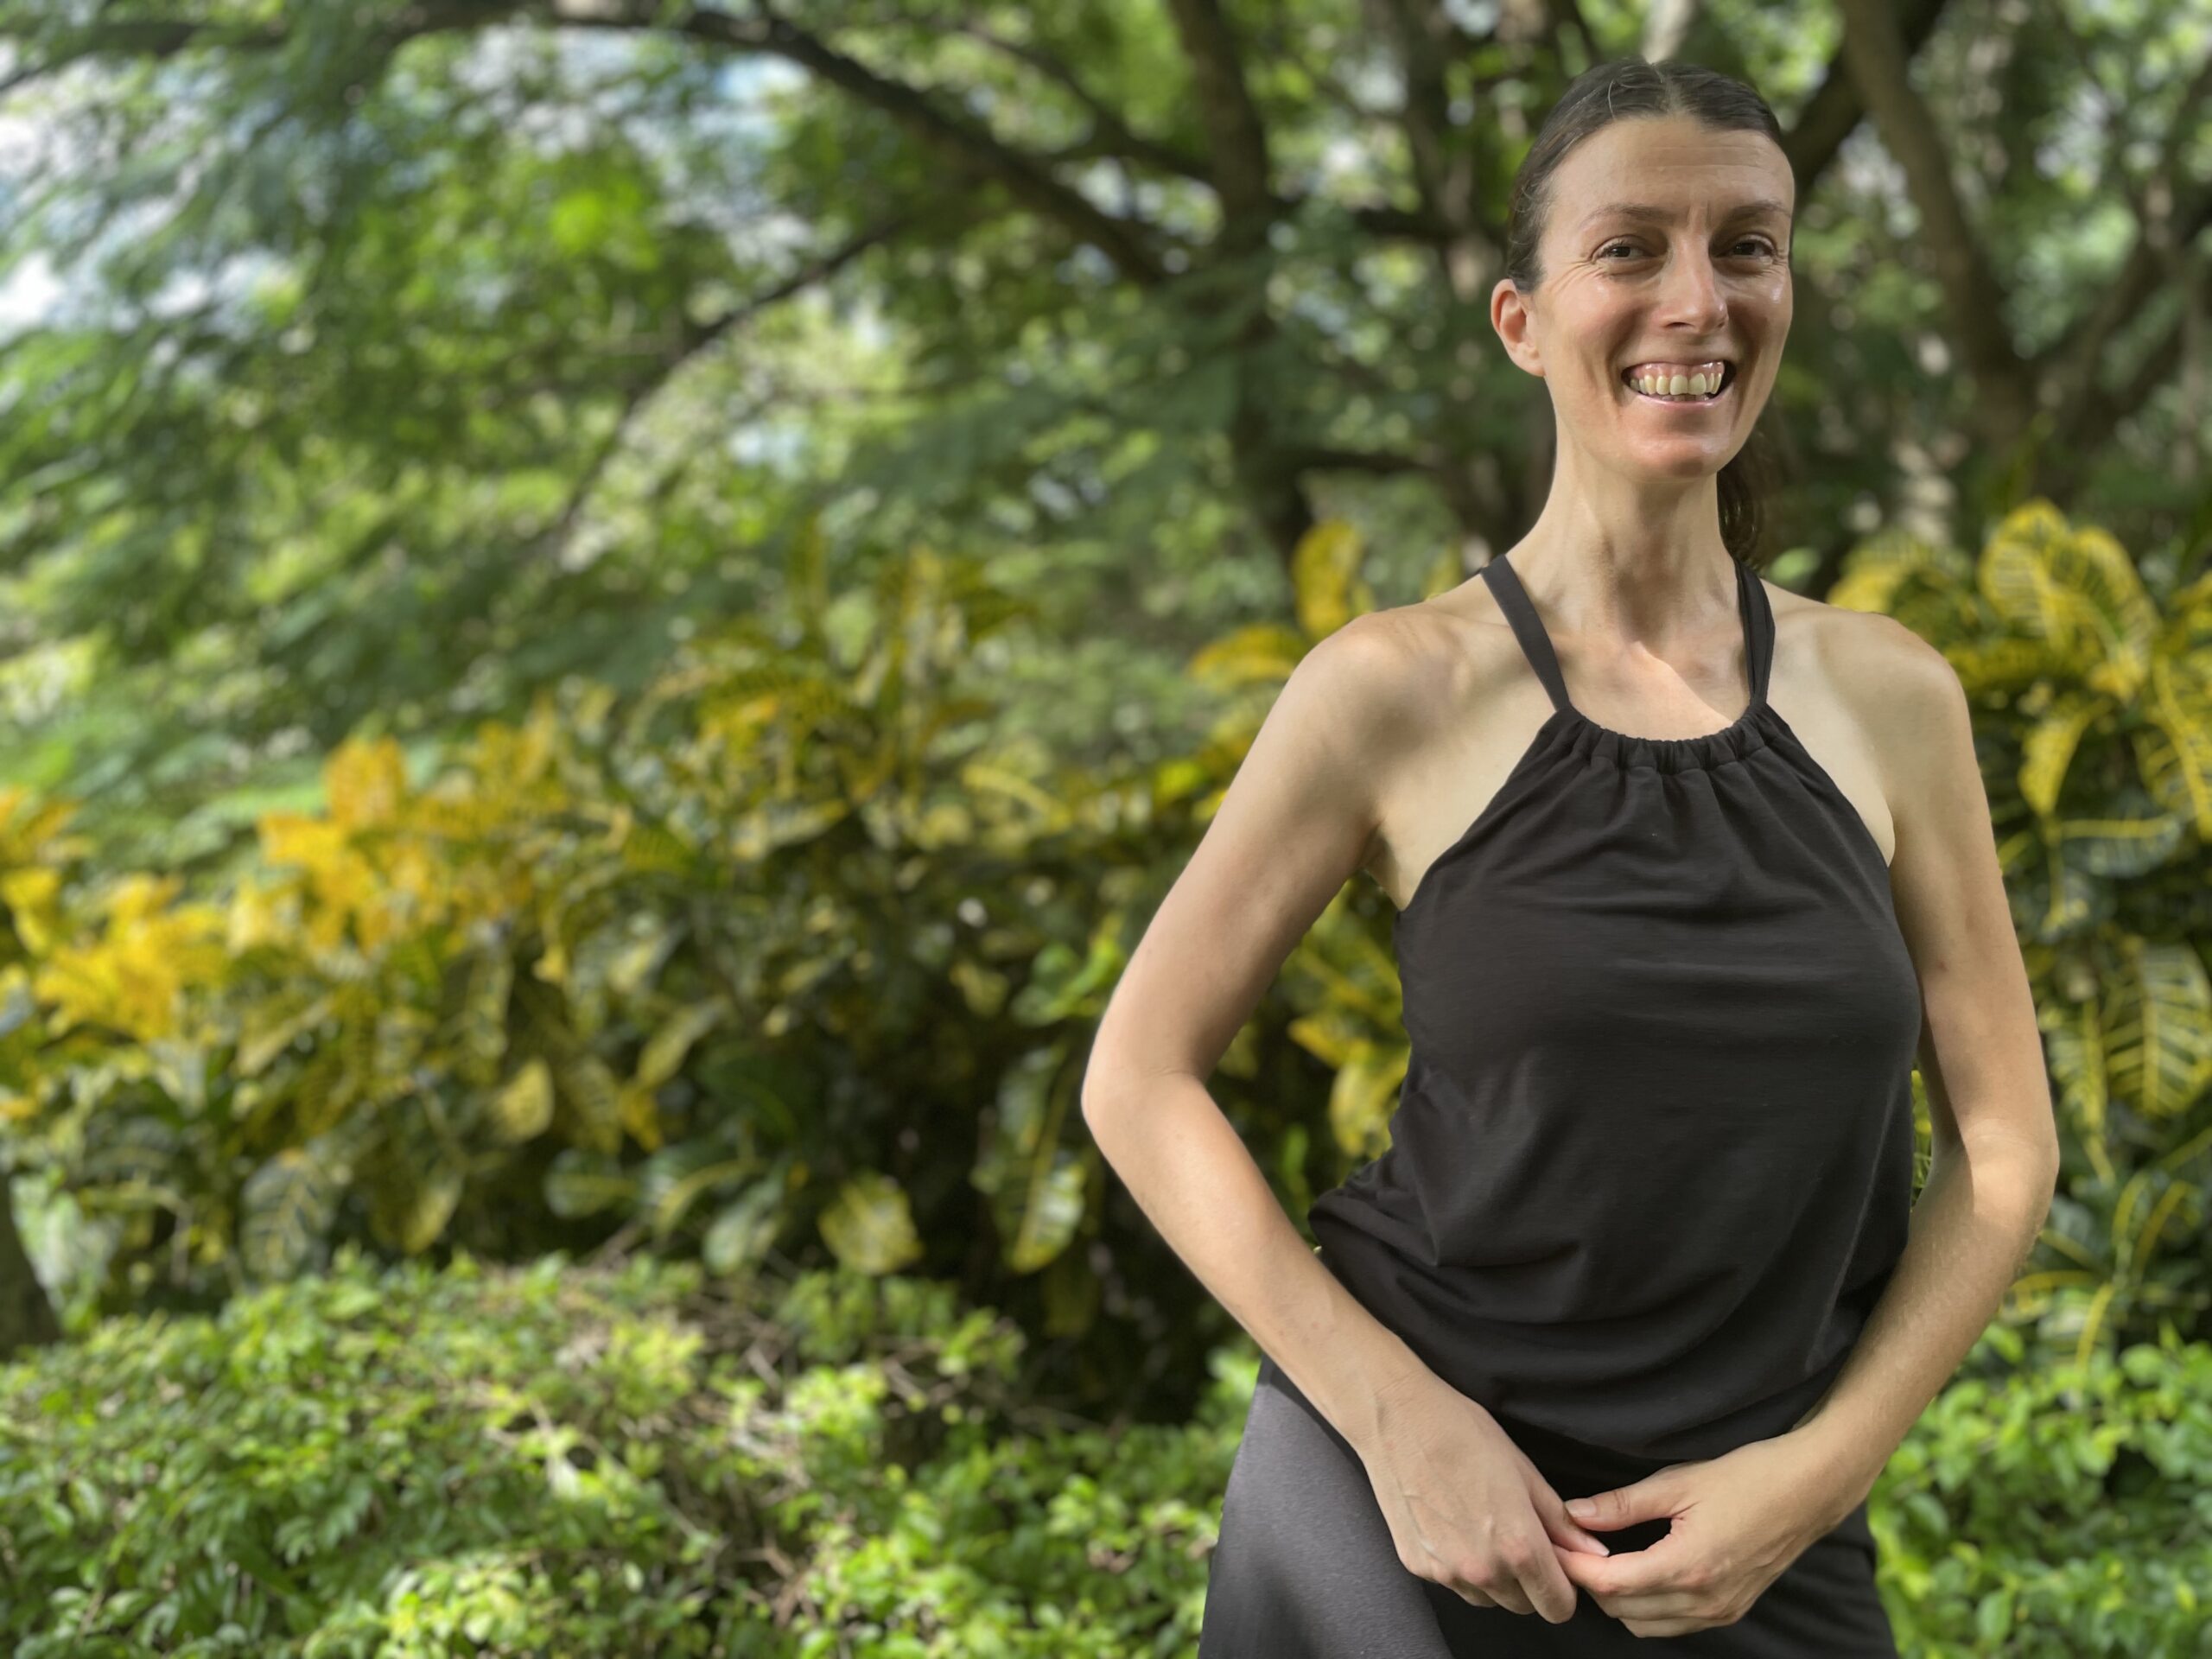 Danae Robinett is standing outdoors, smiling with green foliage and yellow leaves in the background, wearing a sleeveless black top.